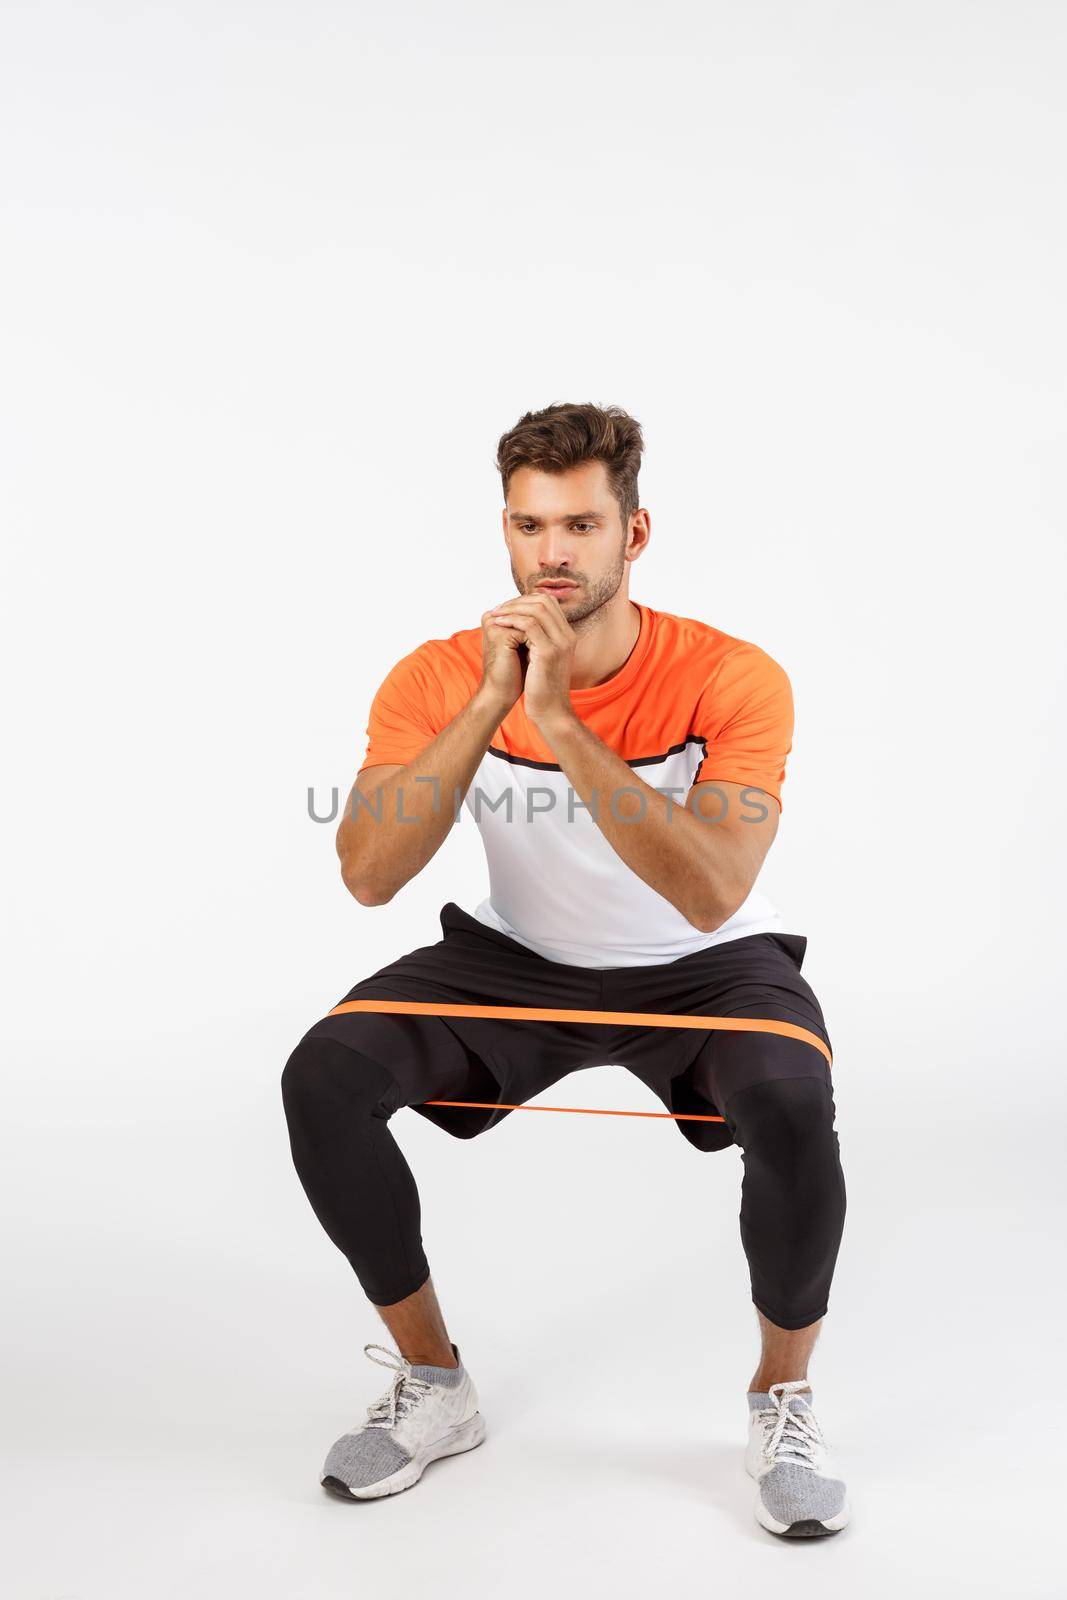 Motivated, focused good-looking sportsman perform squats with resistance rope, stretching equipment by bending feet sideways, sit and clench arms together to be good shape, workout concept.